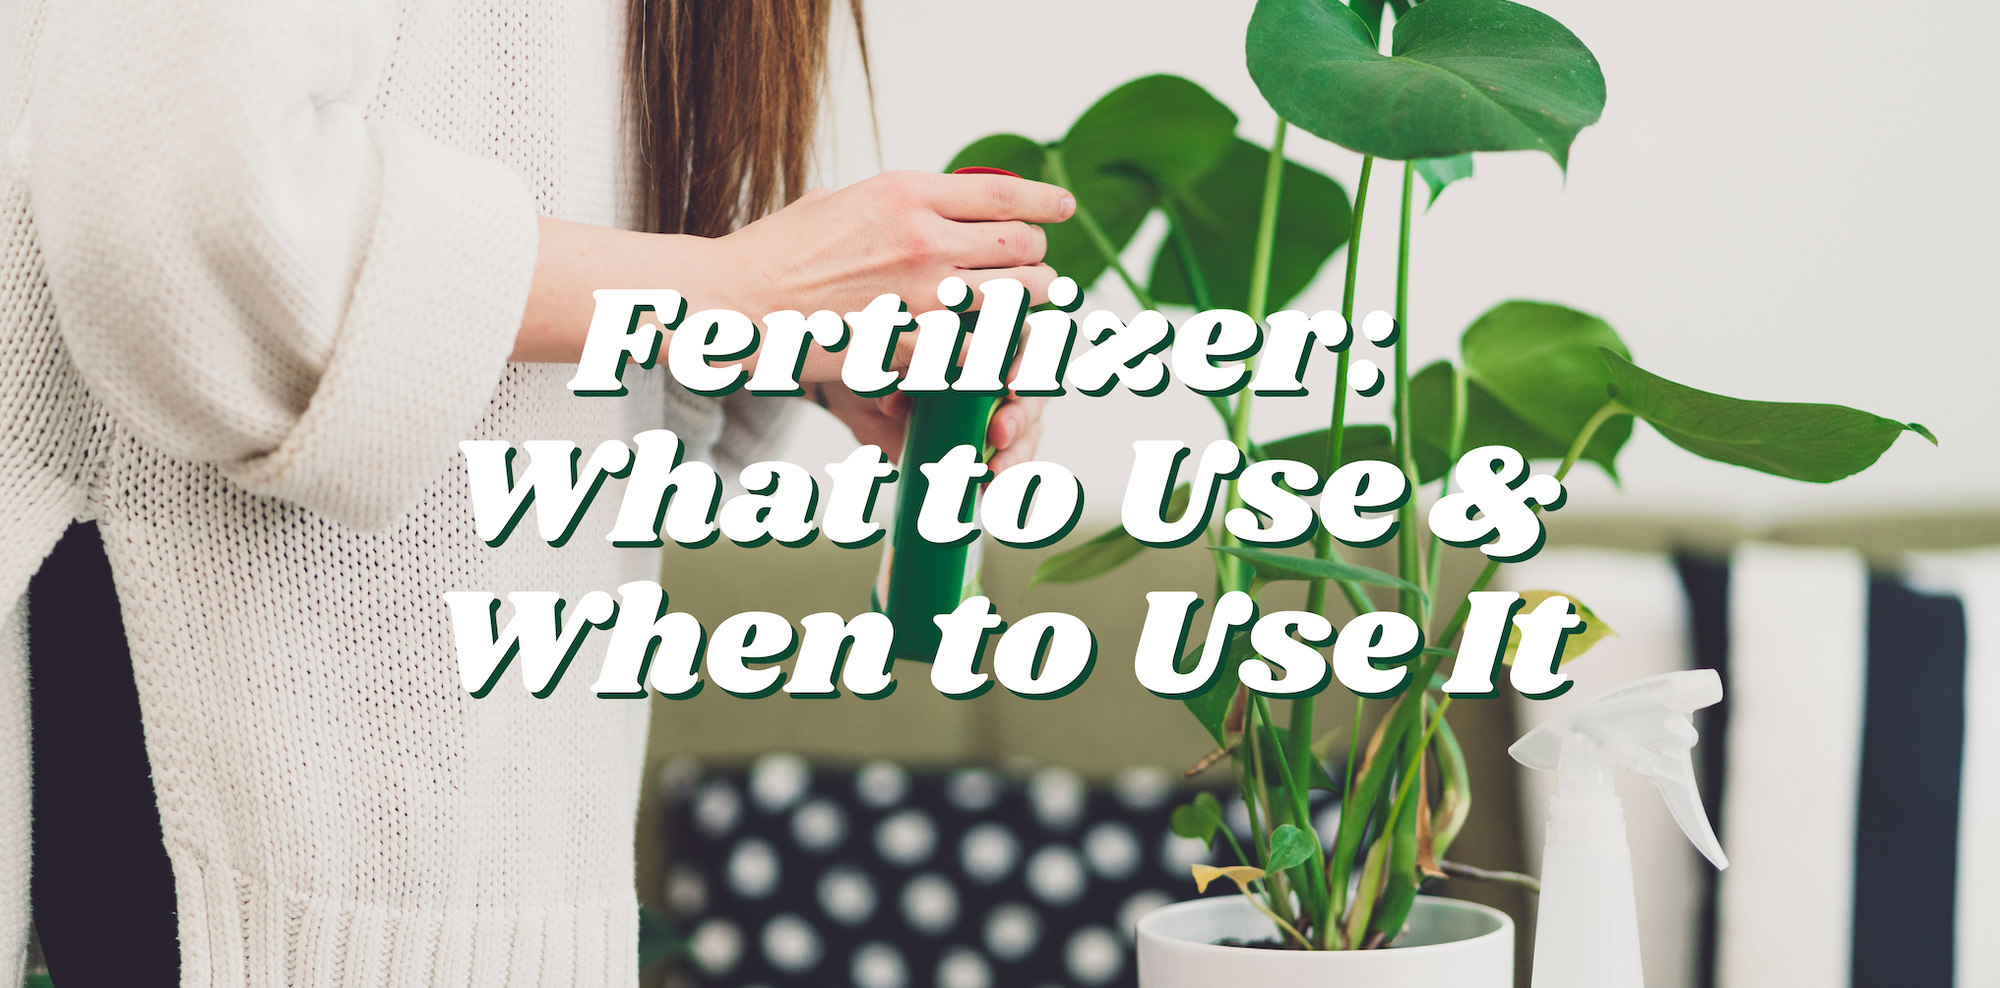 Fertilizer: What to Use & When to Use It